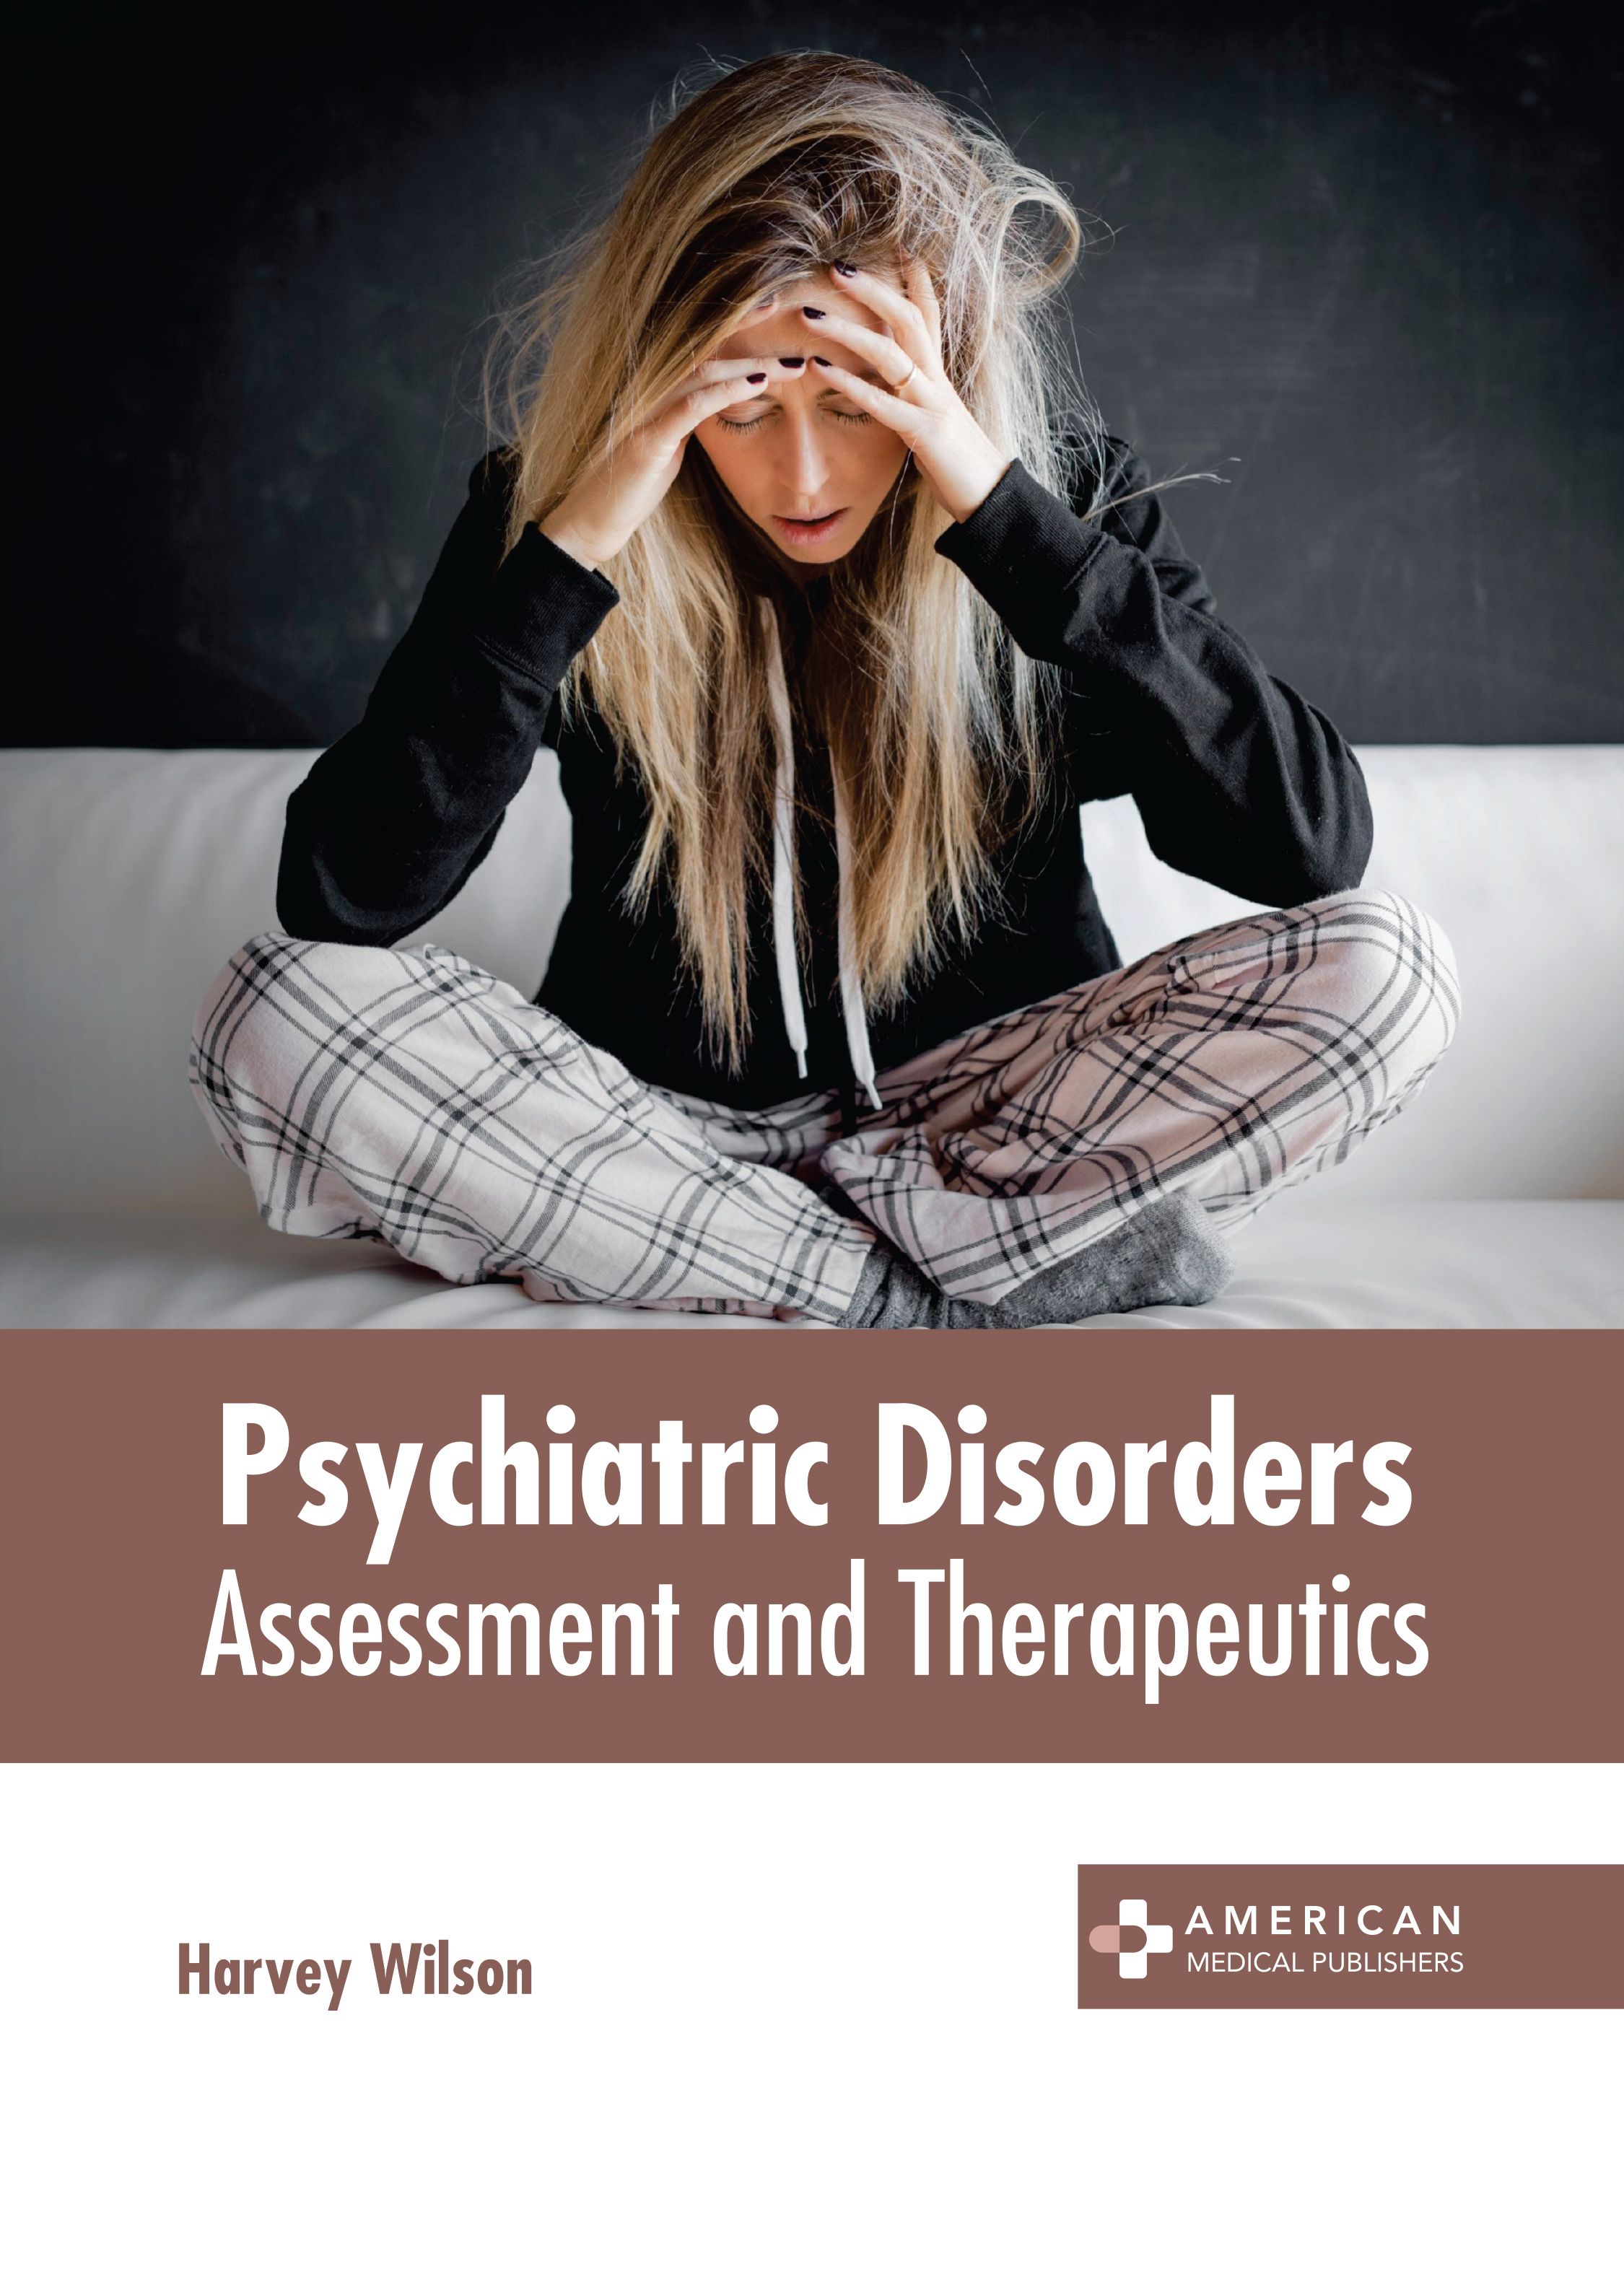 PSYCHIATRIC DISORDERS: ASSESSMENT AND THERAPEUTICS